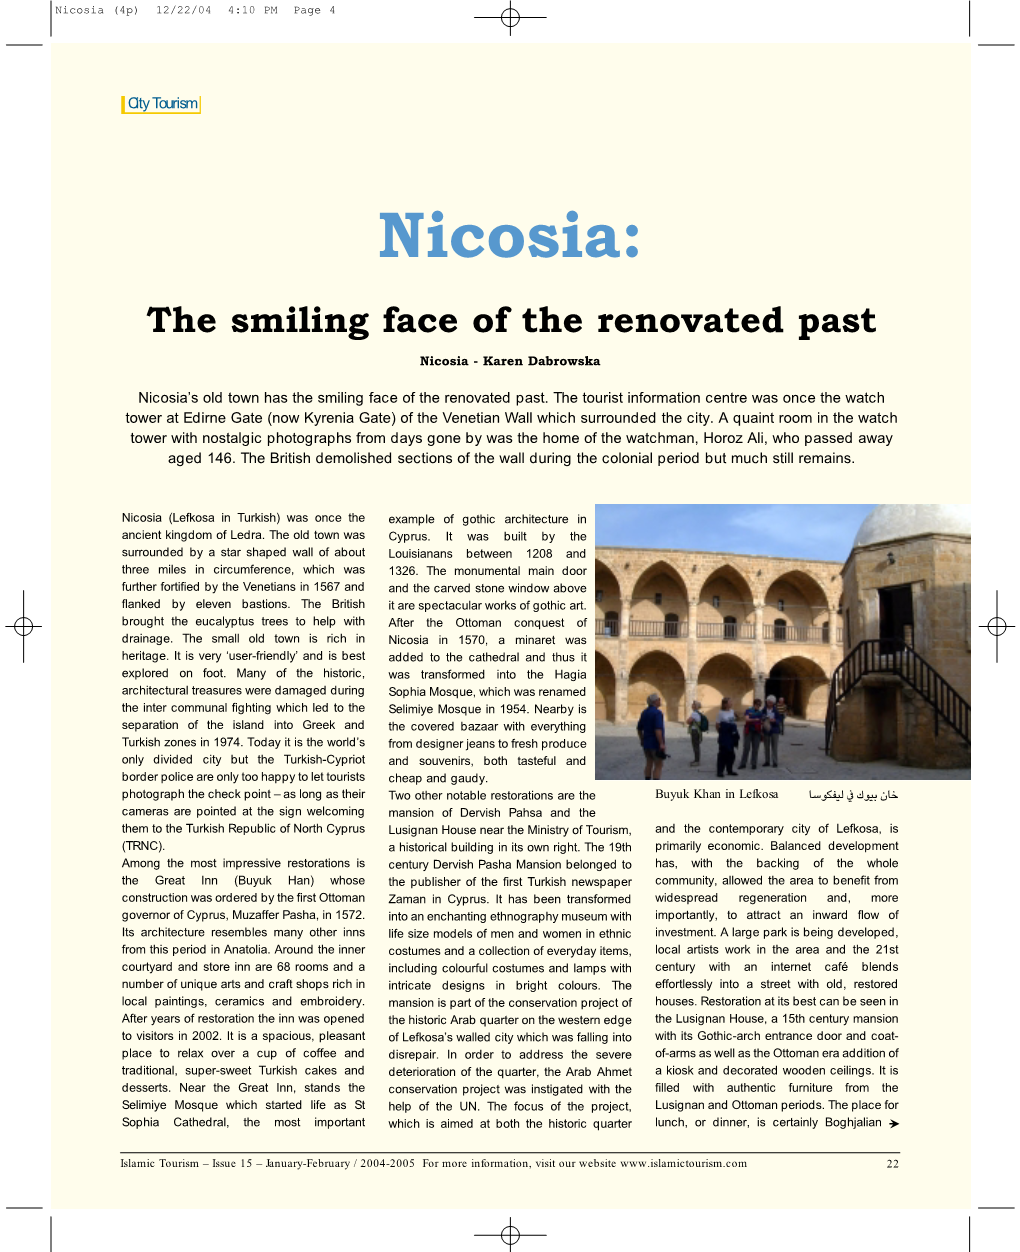 Nicosia: the Smiling Face of the Renovated Past